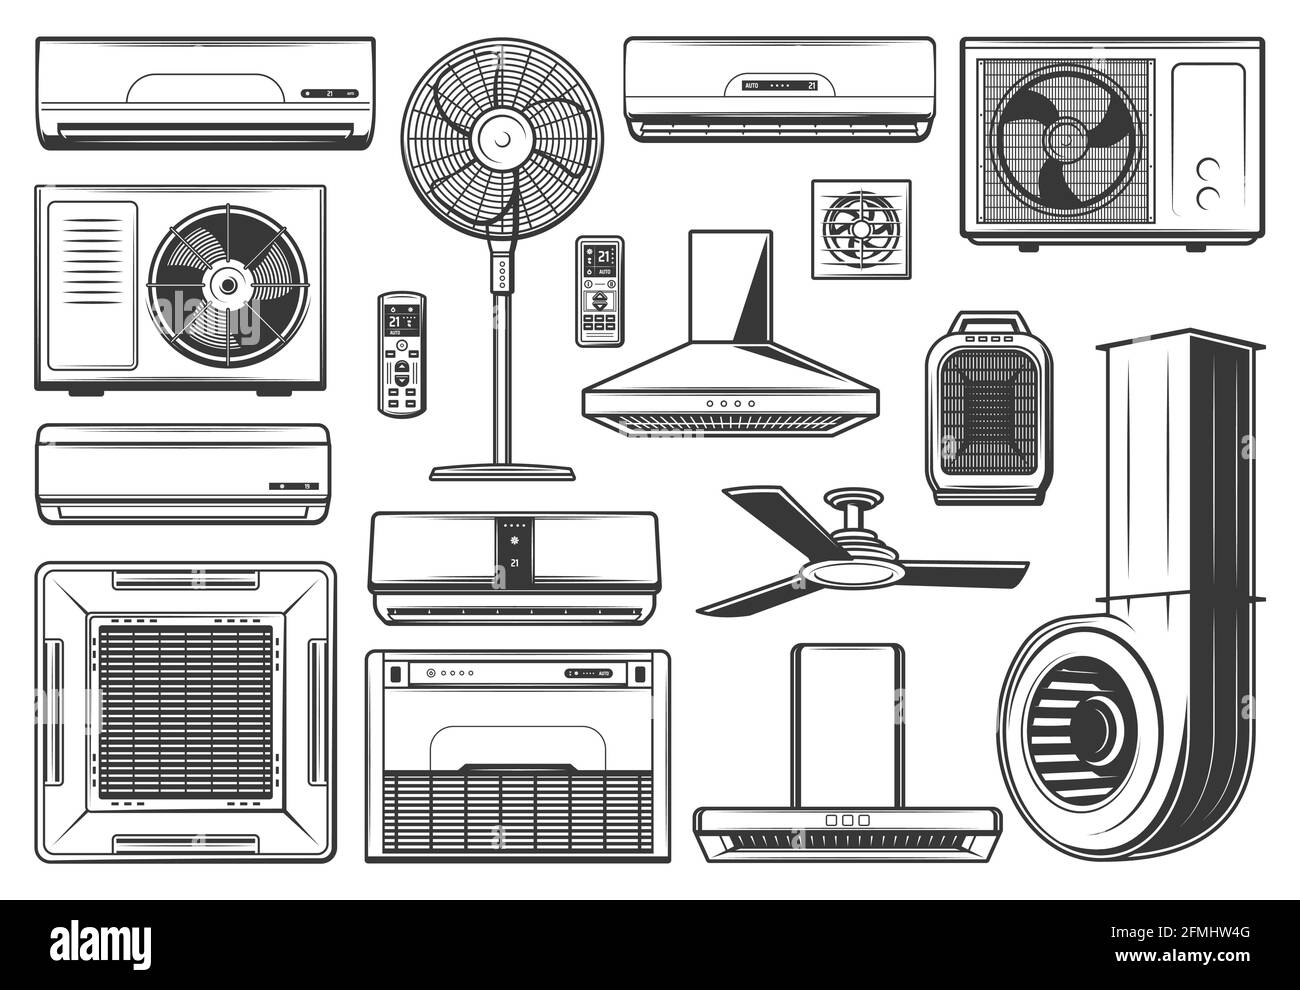 Conditioning and ventilation appliances icons, air conditioner equipment items, vector. Kitchen exhaust or cooking hood and climate split system appli Stock Vector